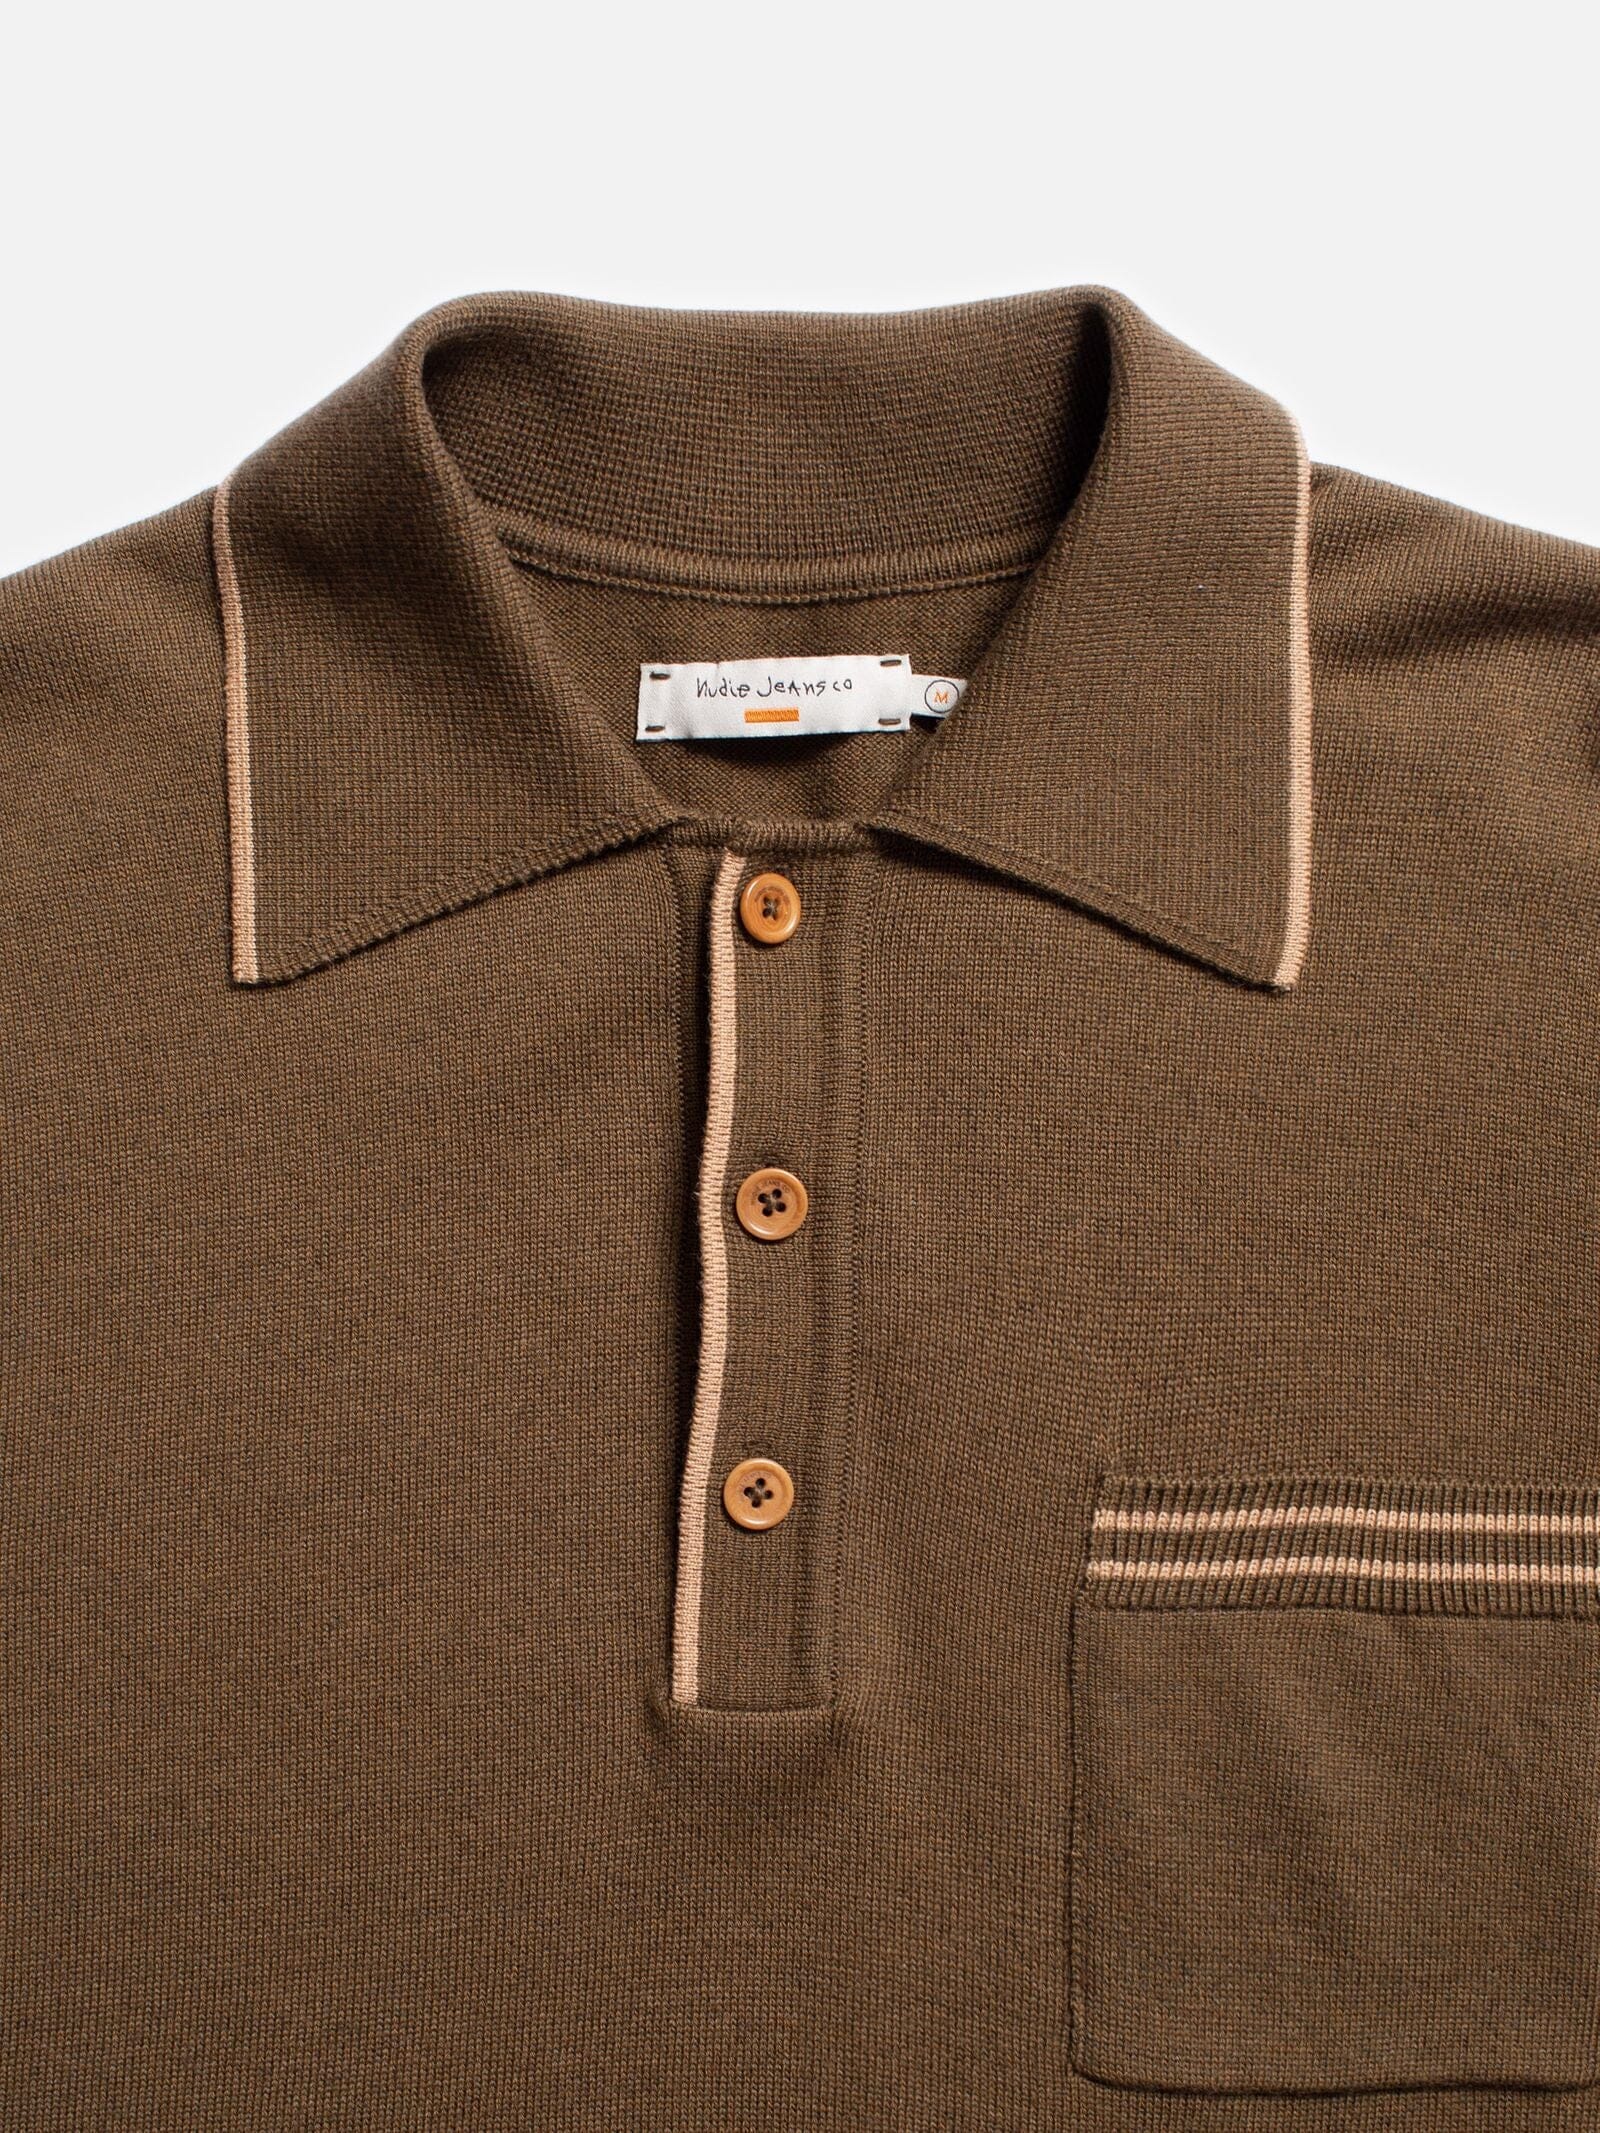 Nudie Jeans Co. - Frippe Polo Club Shirt Olive - City Workshop Men's Supply Co.